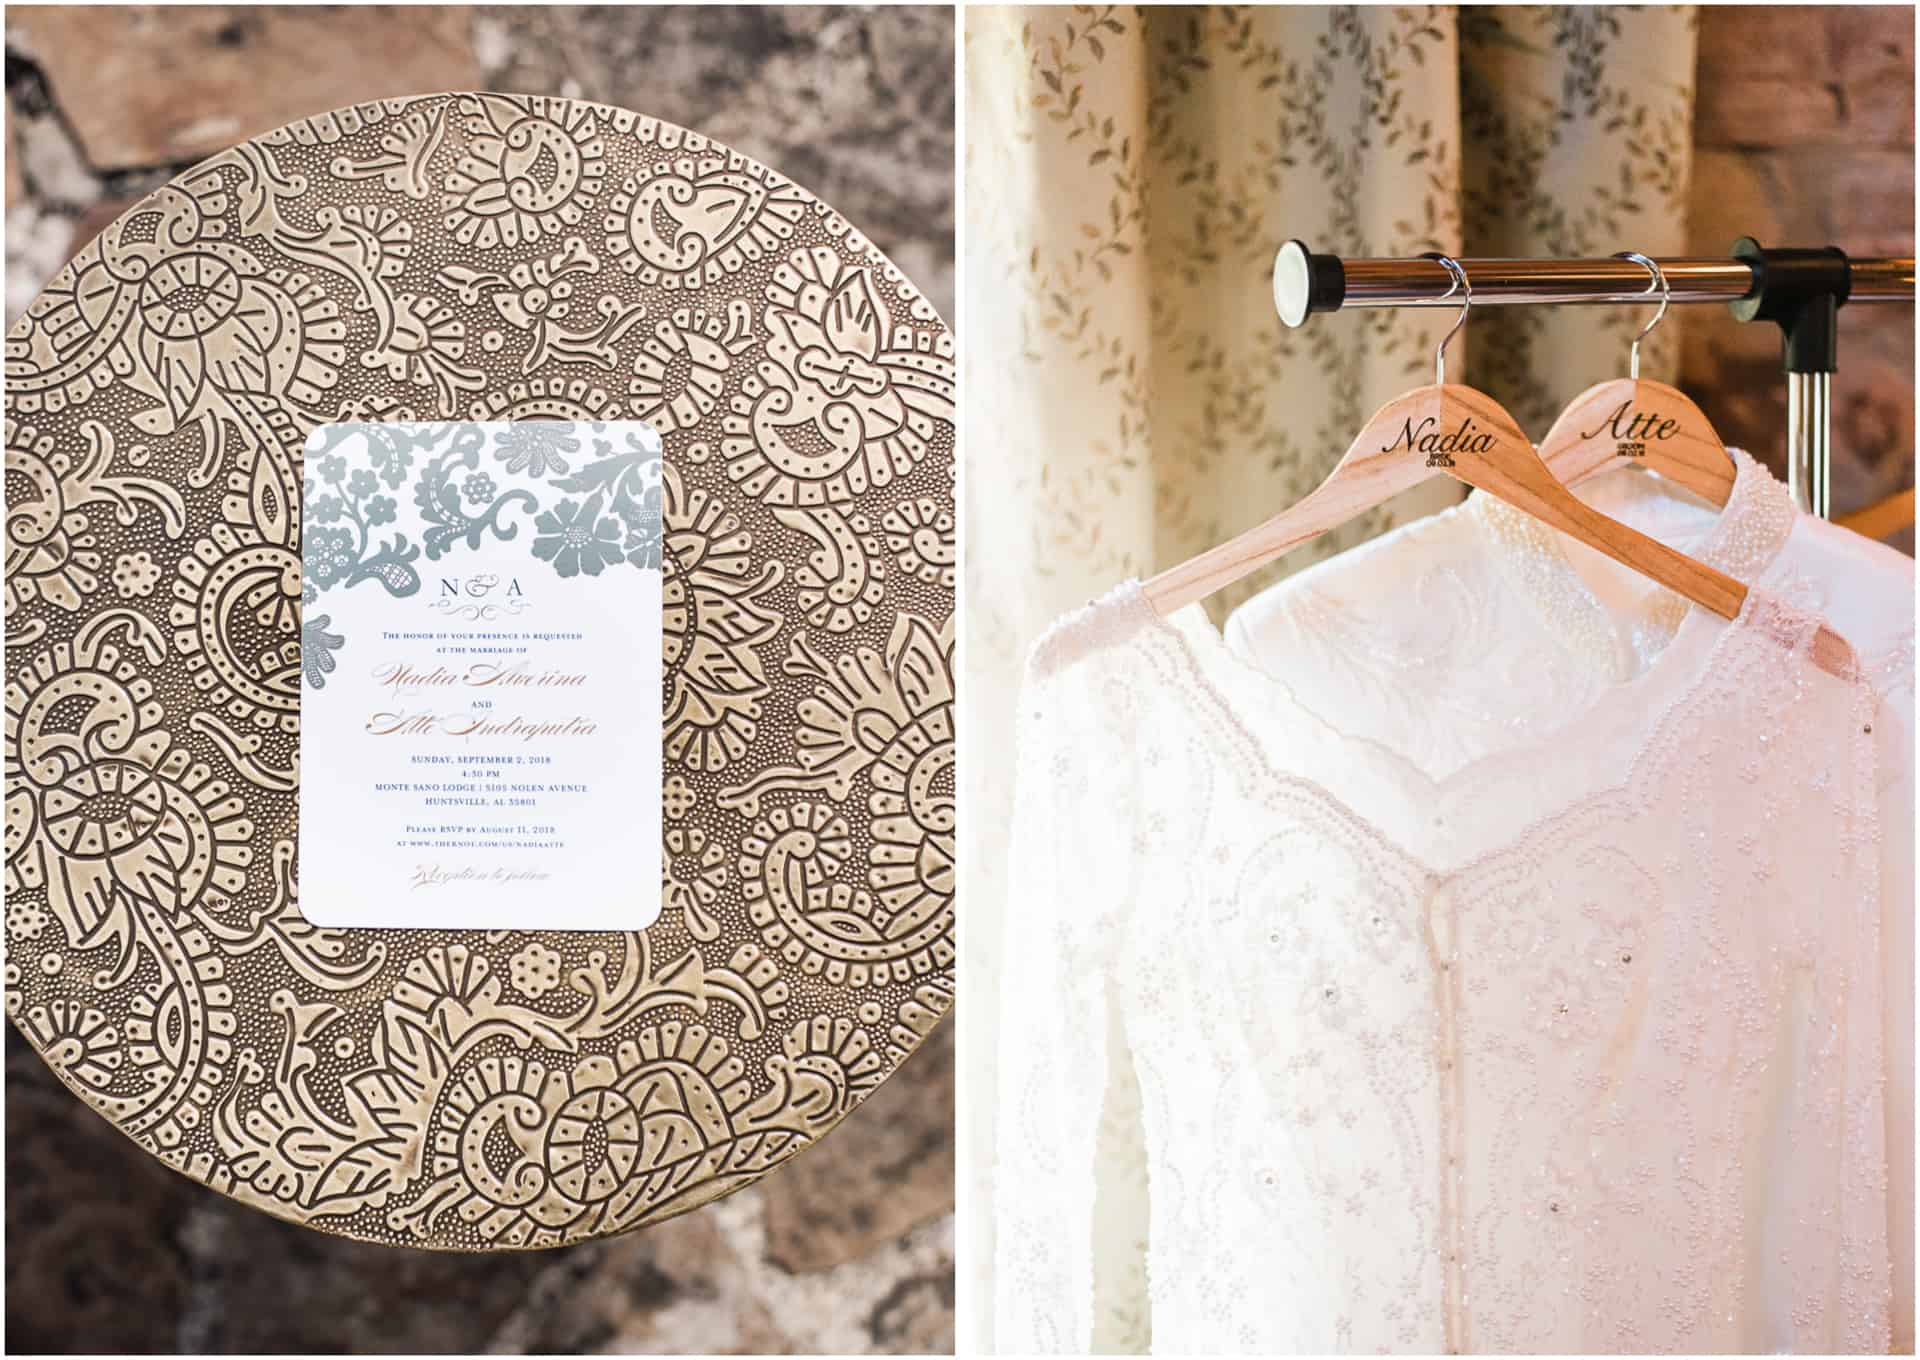 Nadia and Atte - Indonesian Bridal Details Wedding Invitations and Gown